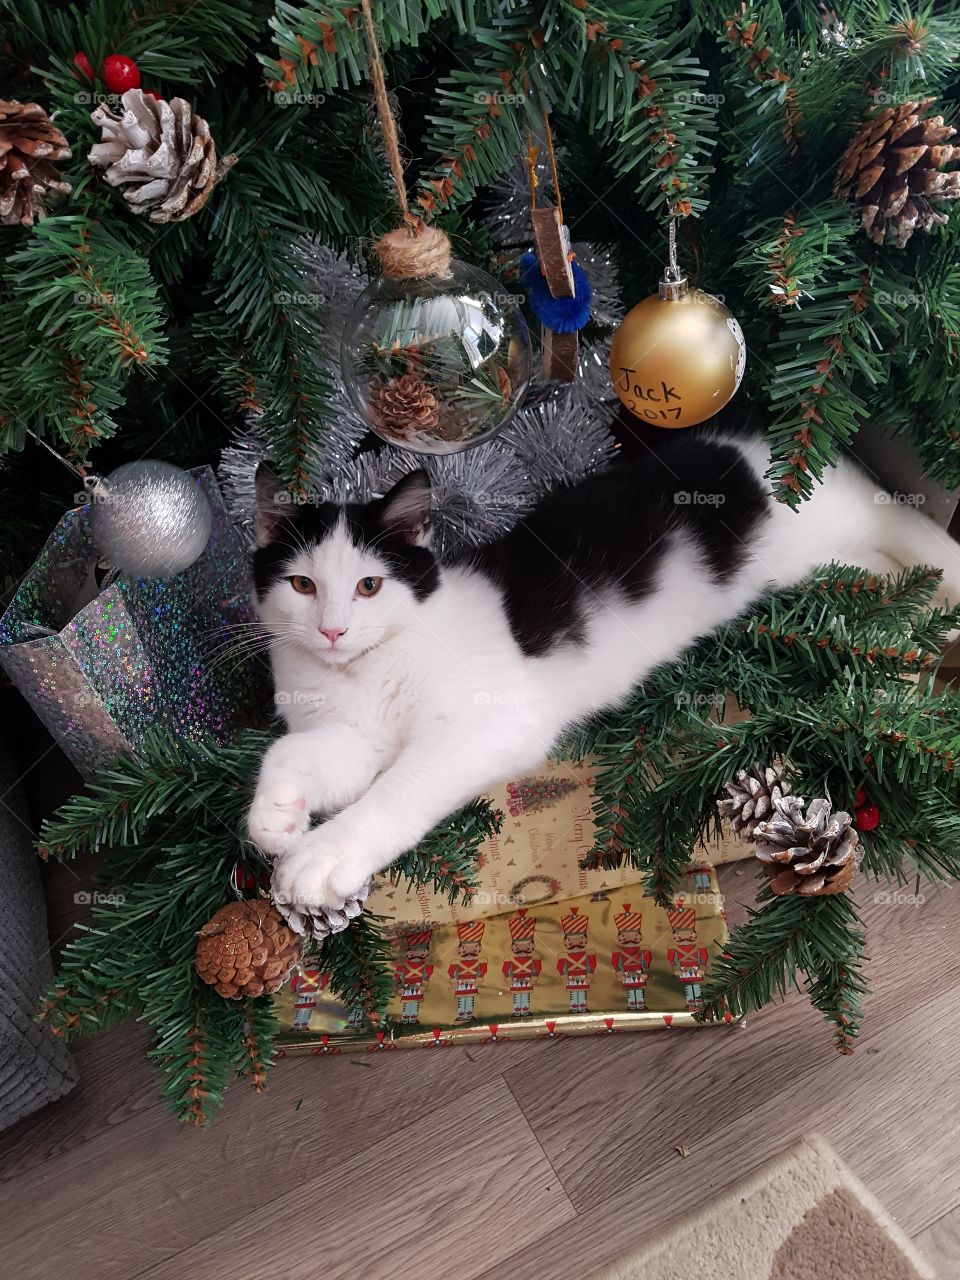 dexter the black and white kitten relaxing in the Christmas tree